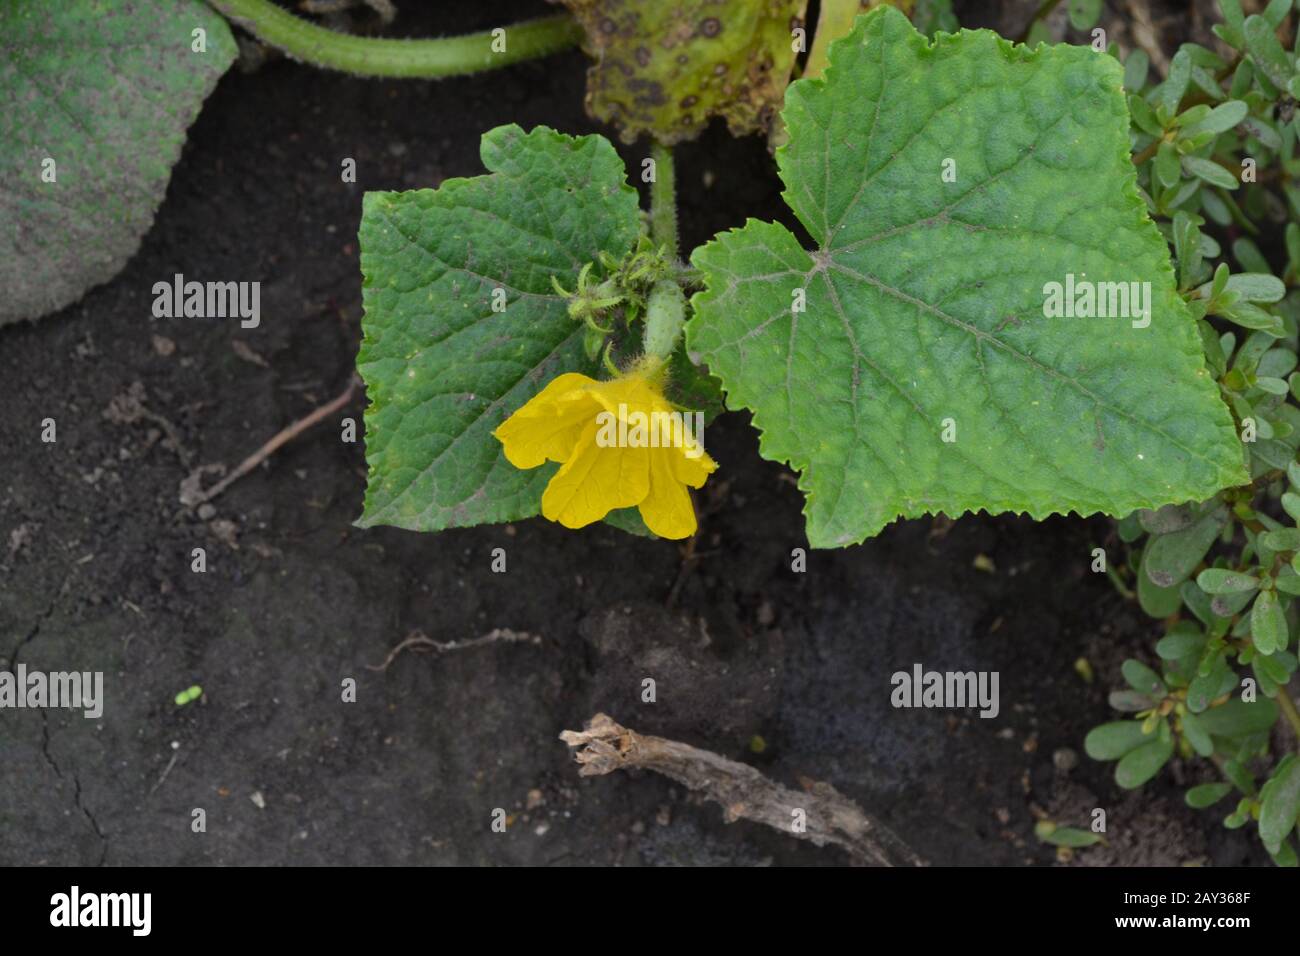 Cucumber. Cucumis sativus. Cucumber Leaves. Flowers cucumber. Cucumber growing in the garden. Garden. Field. Cultivation of vegetables. Agriculture. H Stock Photo